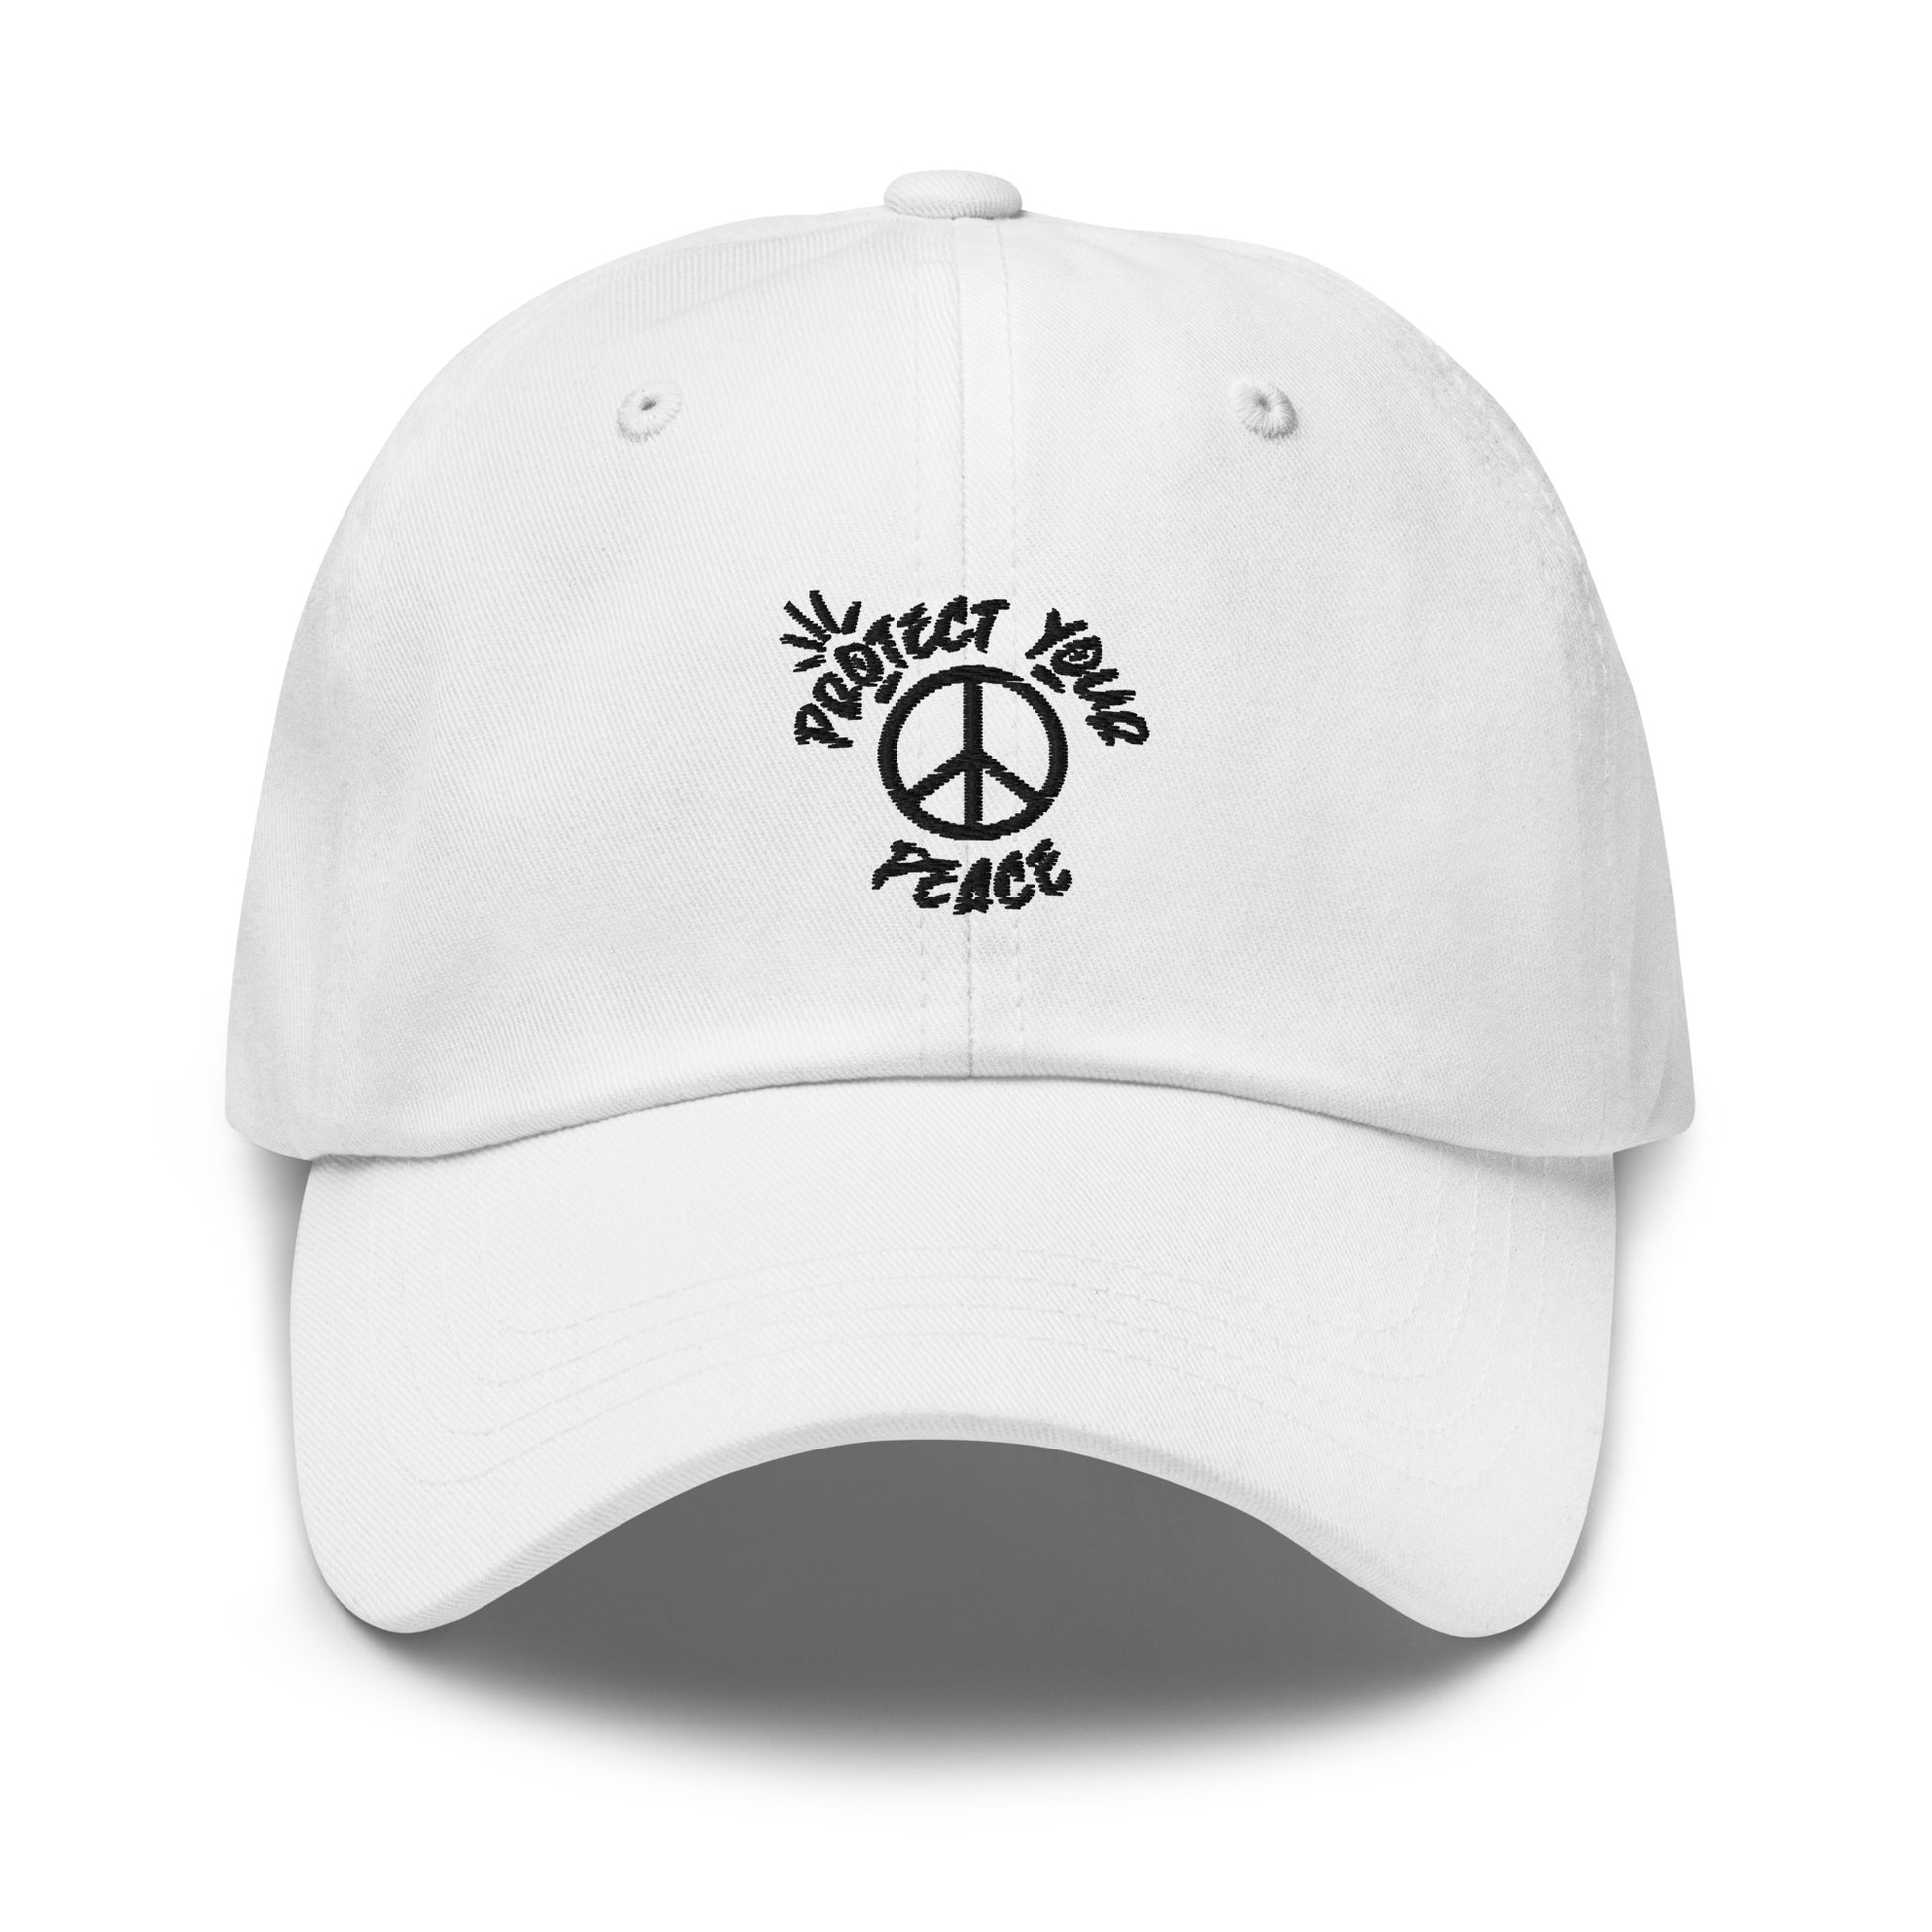 "Chic 'Protect Your Peace Hat' from Tribe of Weirdos featuring a bold statement embroidery, perfect for fashionably upholding your serenity."